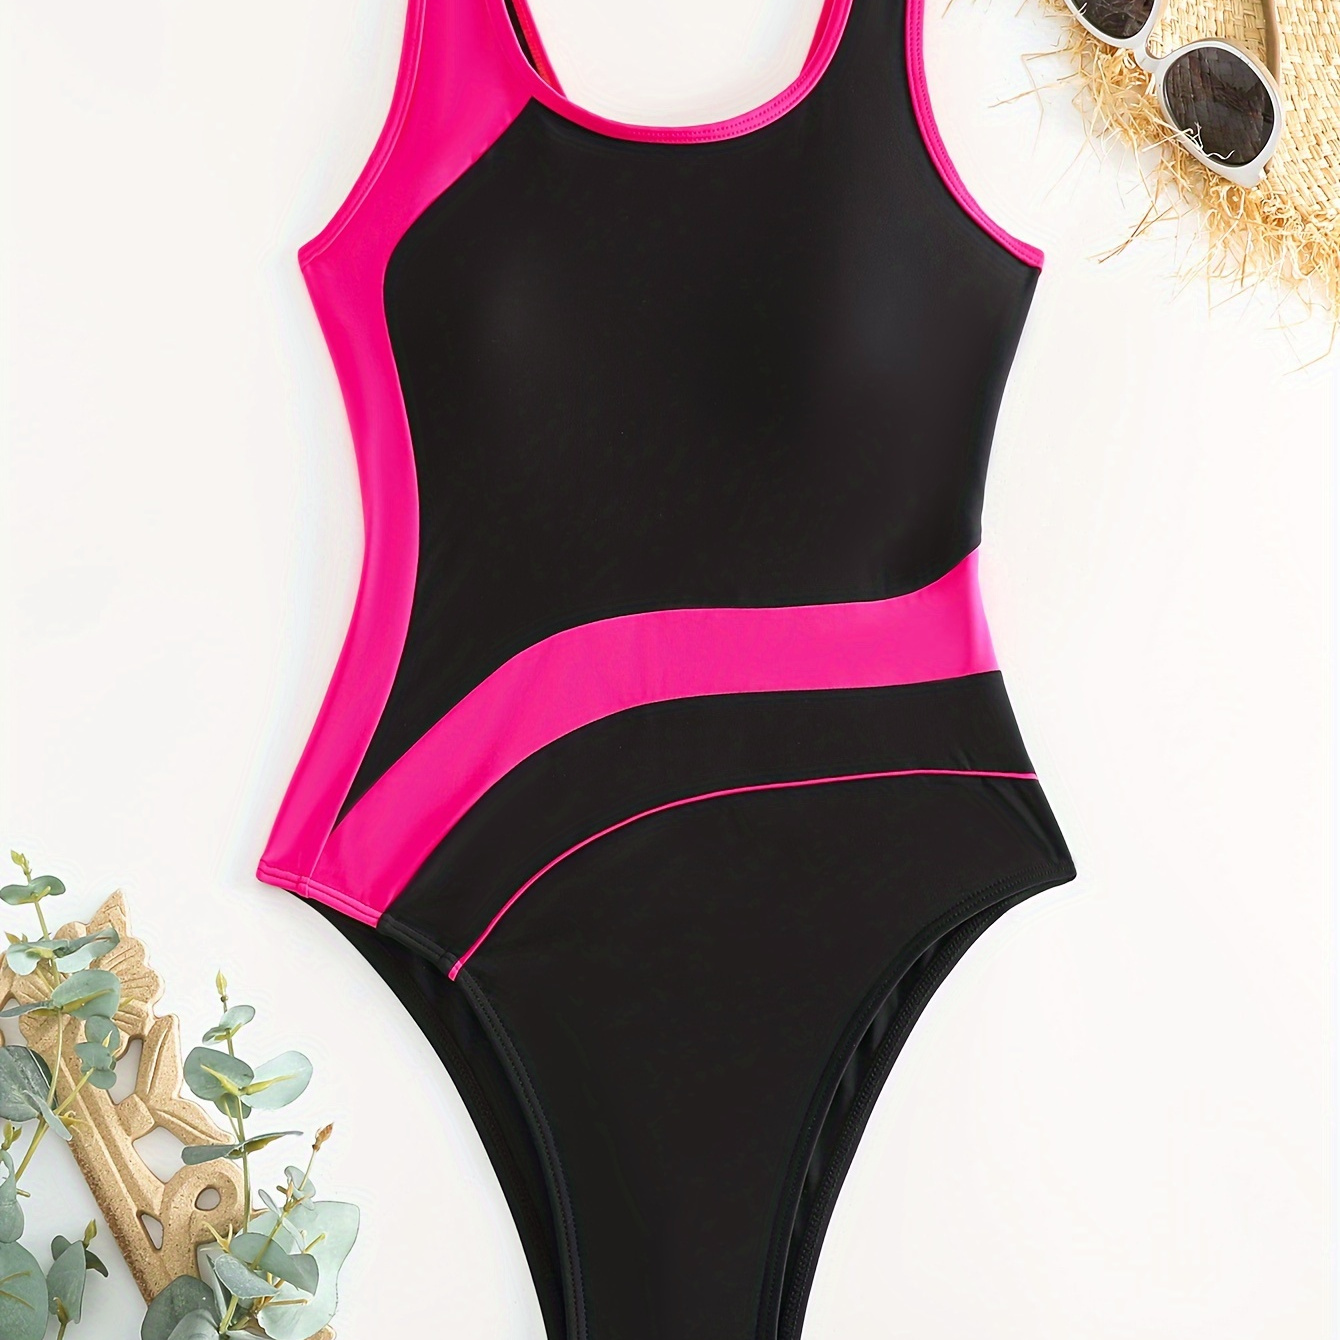 

Backless Color Block Magenta & Black One-piece Swimsuit, Round Neck High Cut Stretchy Water Sports Bathing Suits, Women's Swimwear & Clothing For Koningsdag/king's Day